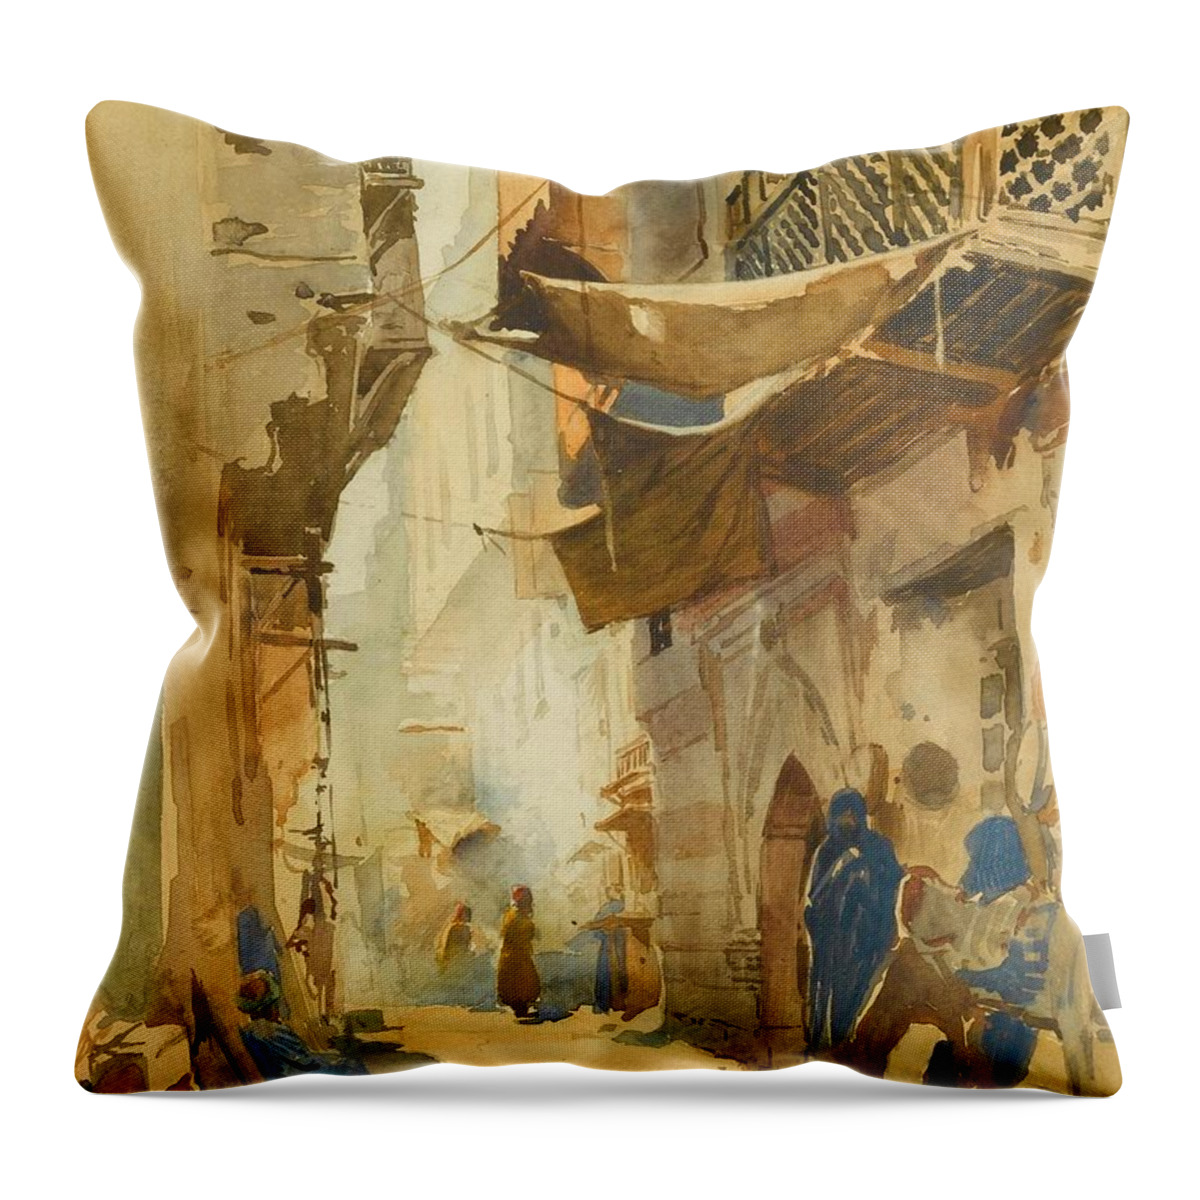 Konstantin Egorovich Makovsky (moscow 1839 - St. Petersburg 1915) Throw Pillow featuring the painting A Study for A Street Scene in Cairo by MotionAge Designs